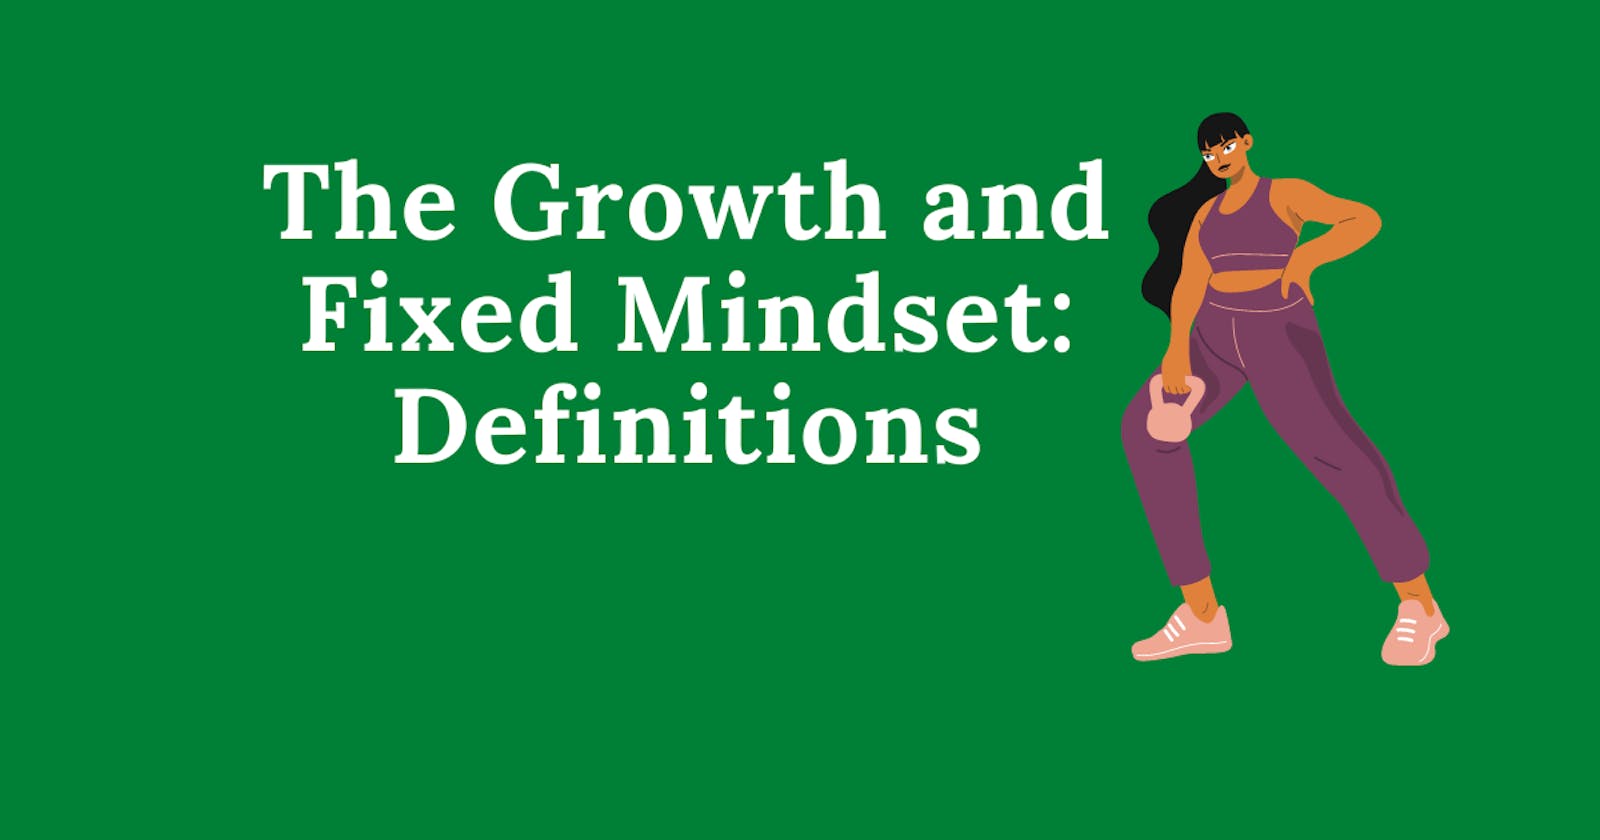 The Growth and Fixed Mindset: Definitions